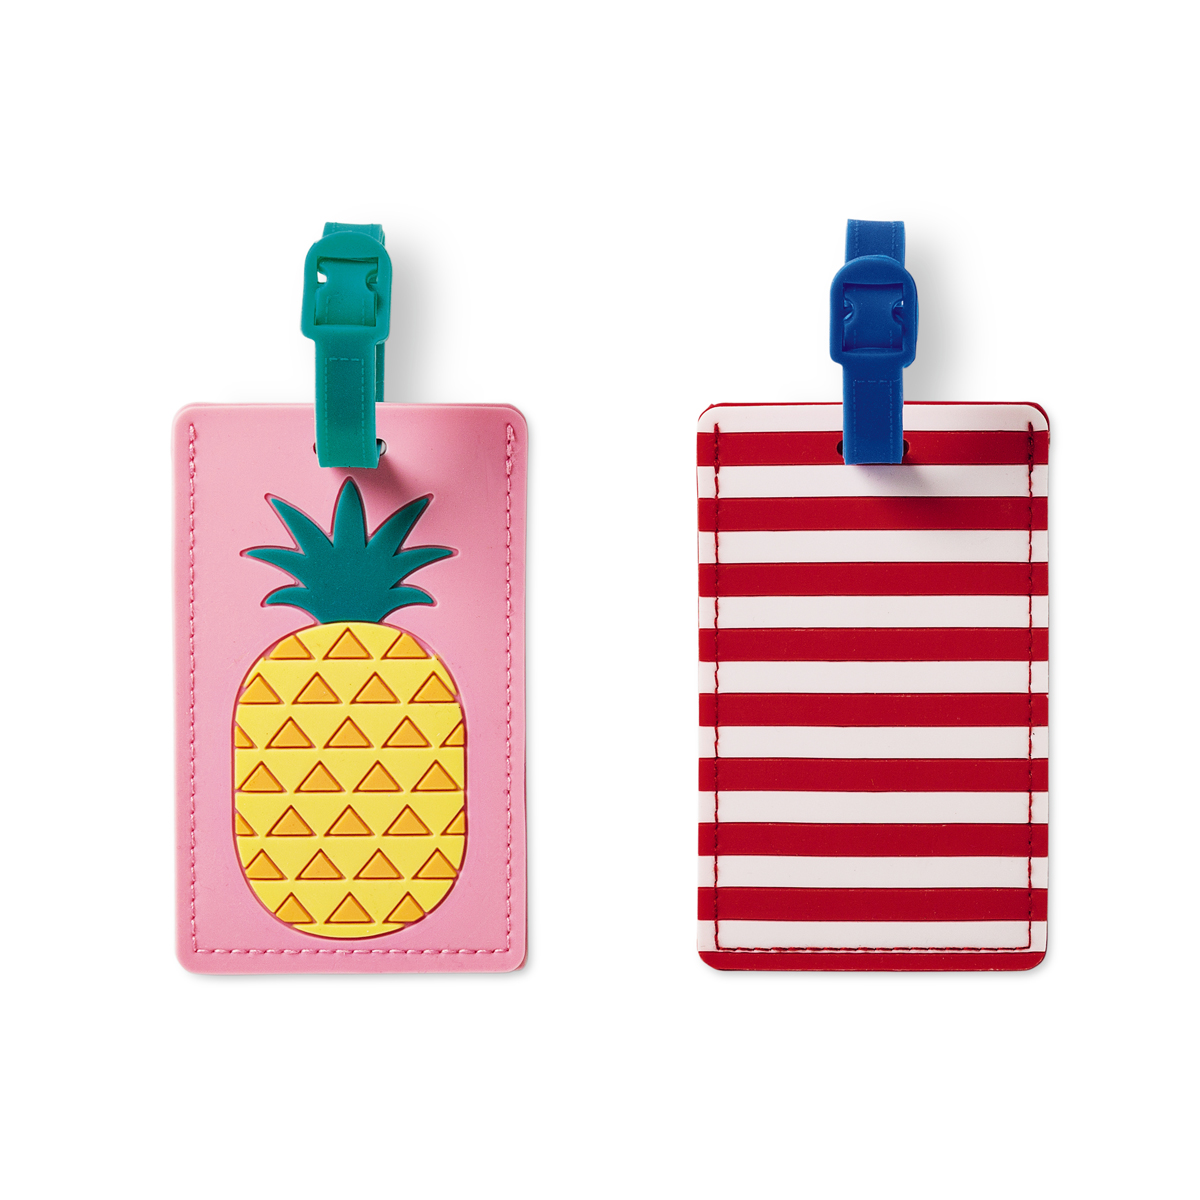 Jetting off? A bright luggage tag from Flying Tiger will make your suitcase easy to spot on the baggage carousel! £1 each.